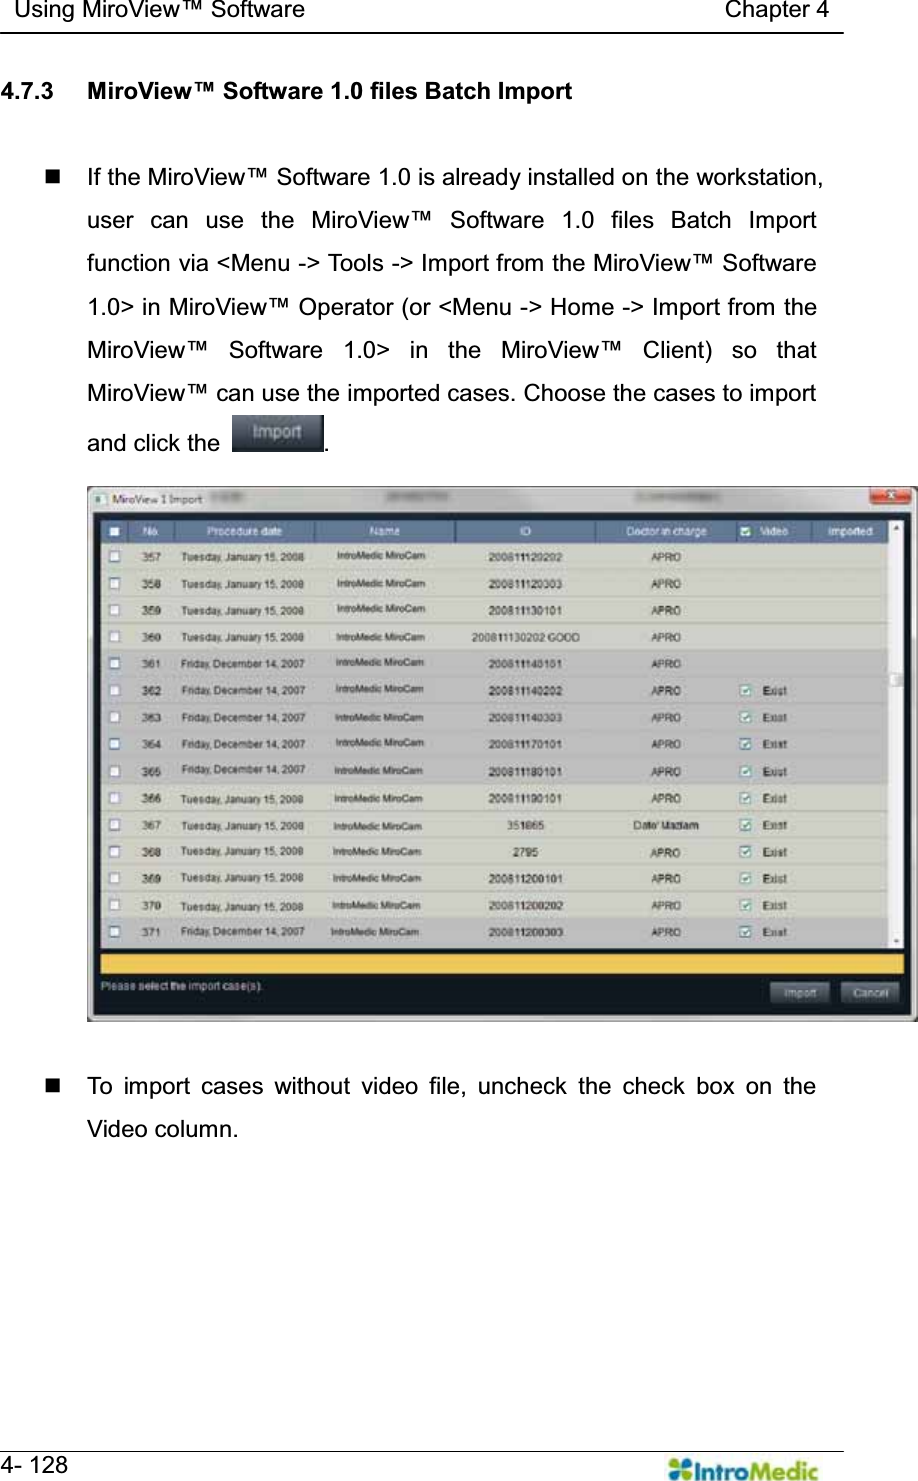   Using MiroView Software                                   Chapter 4   4- 128 4.7.3  0LUR9LHZSoftware 1.0 files Batch Import   If the 0LUR9LHZSoftware 1.0 is already installed on the workstation, user can use the 0LUR9LHZ Software 1.0 files Batch Import function via &lt;Menu -&gt; Tools -&gt; Import from the 0LUR9LHZSoftware 1.0&gt; in 0LUR9LHZOperator (or &lt;Menu -&gt; Home -&gt; Import from the 0LUR9LHZ Software 1.0&gt; in the 0LUR9LHZ Client) so that 0LUR9LHZcan use the imported cases. Choose the cases to import and click the  .    To import cases without video file, uncheck the check box on the Video column.     